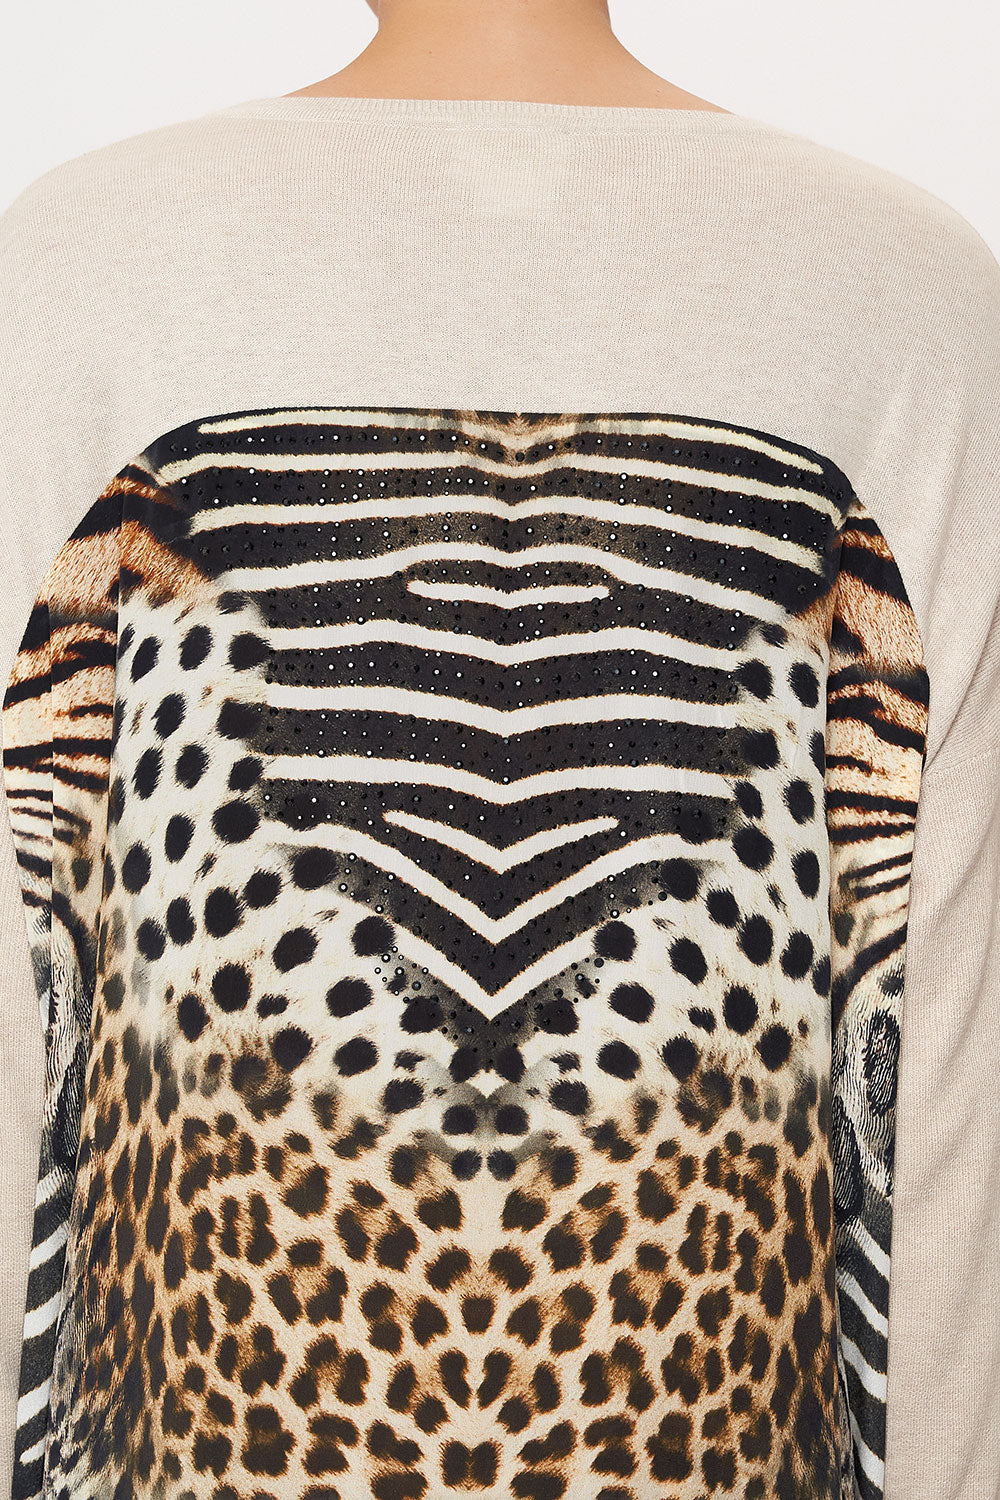 LONG SLEEVE JUMPER WITH PRINT BACK FOR THE LOVE OF LEO